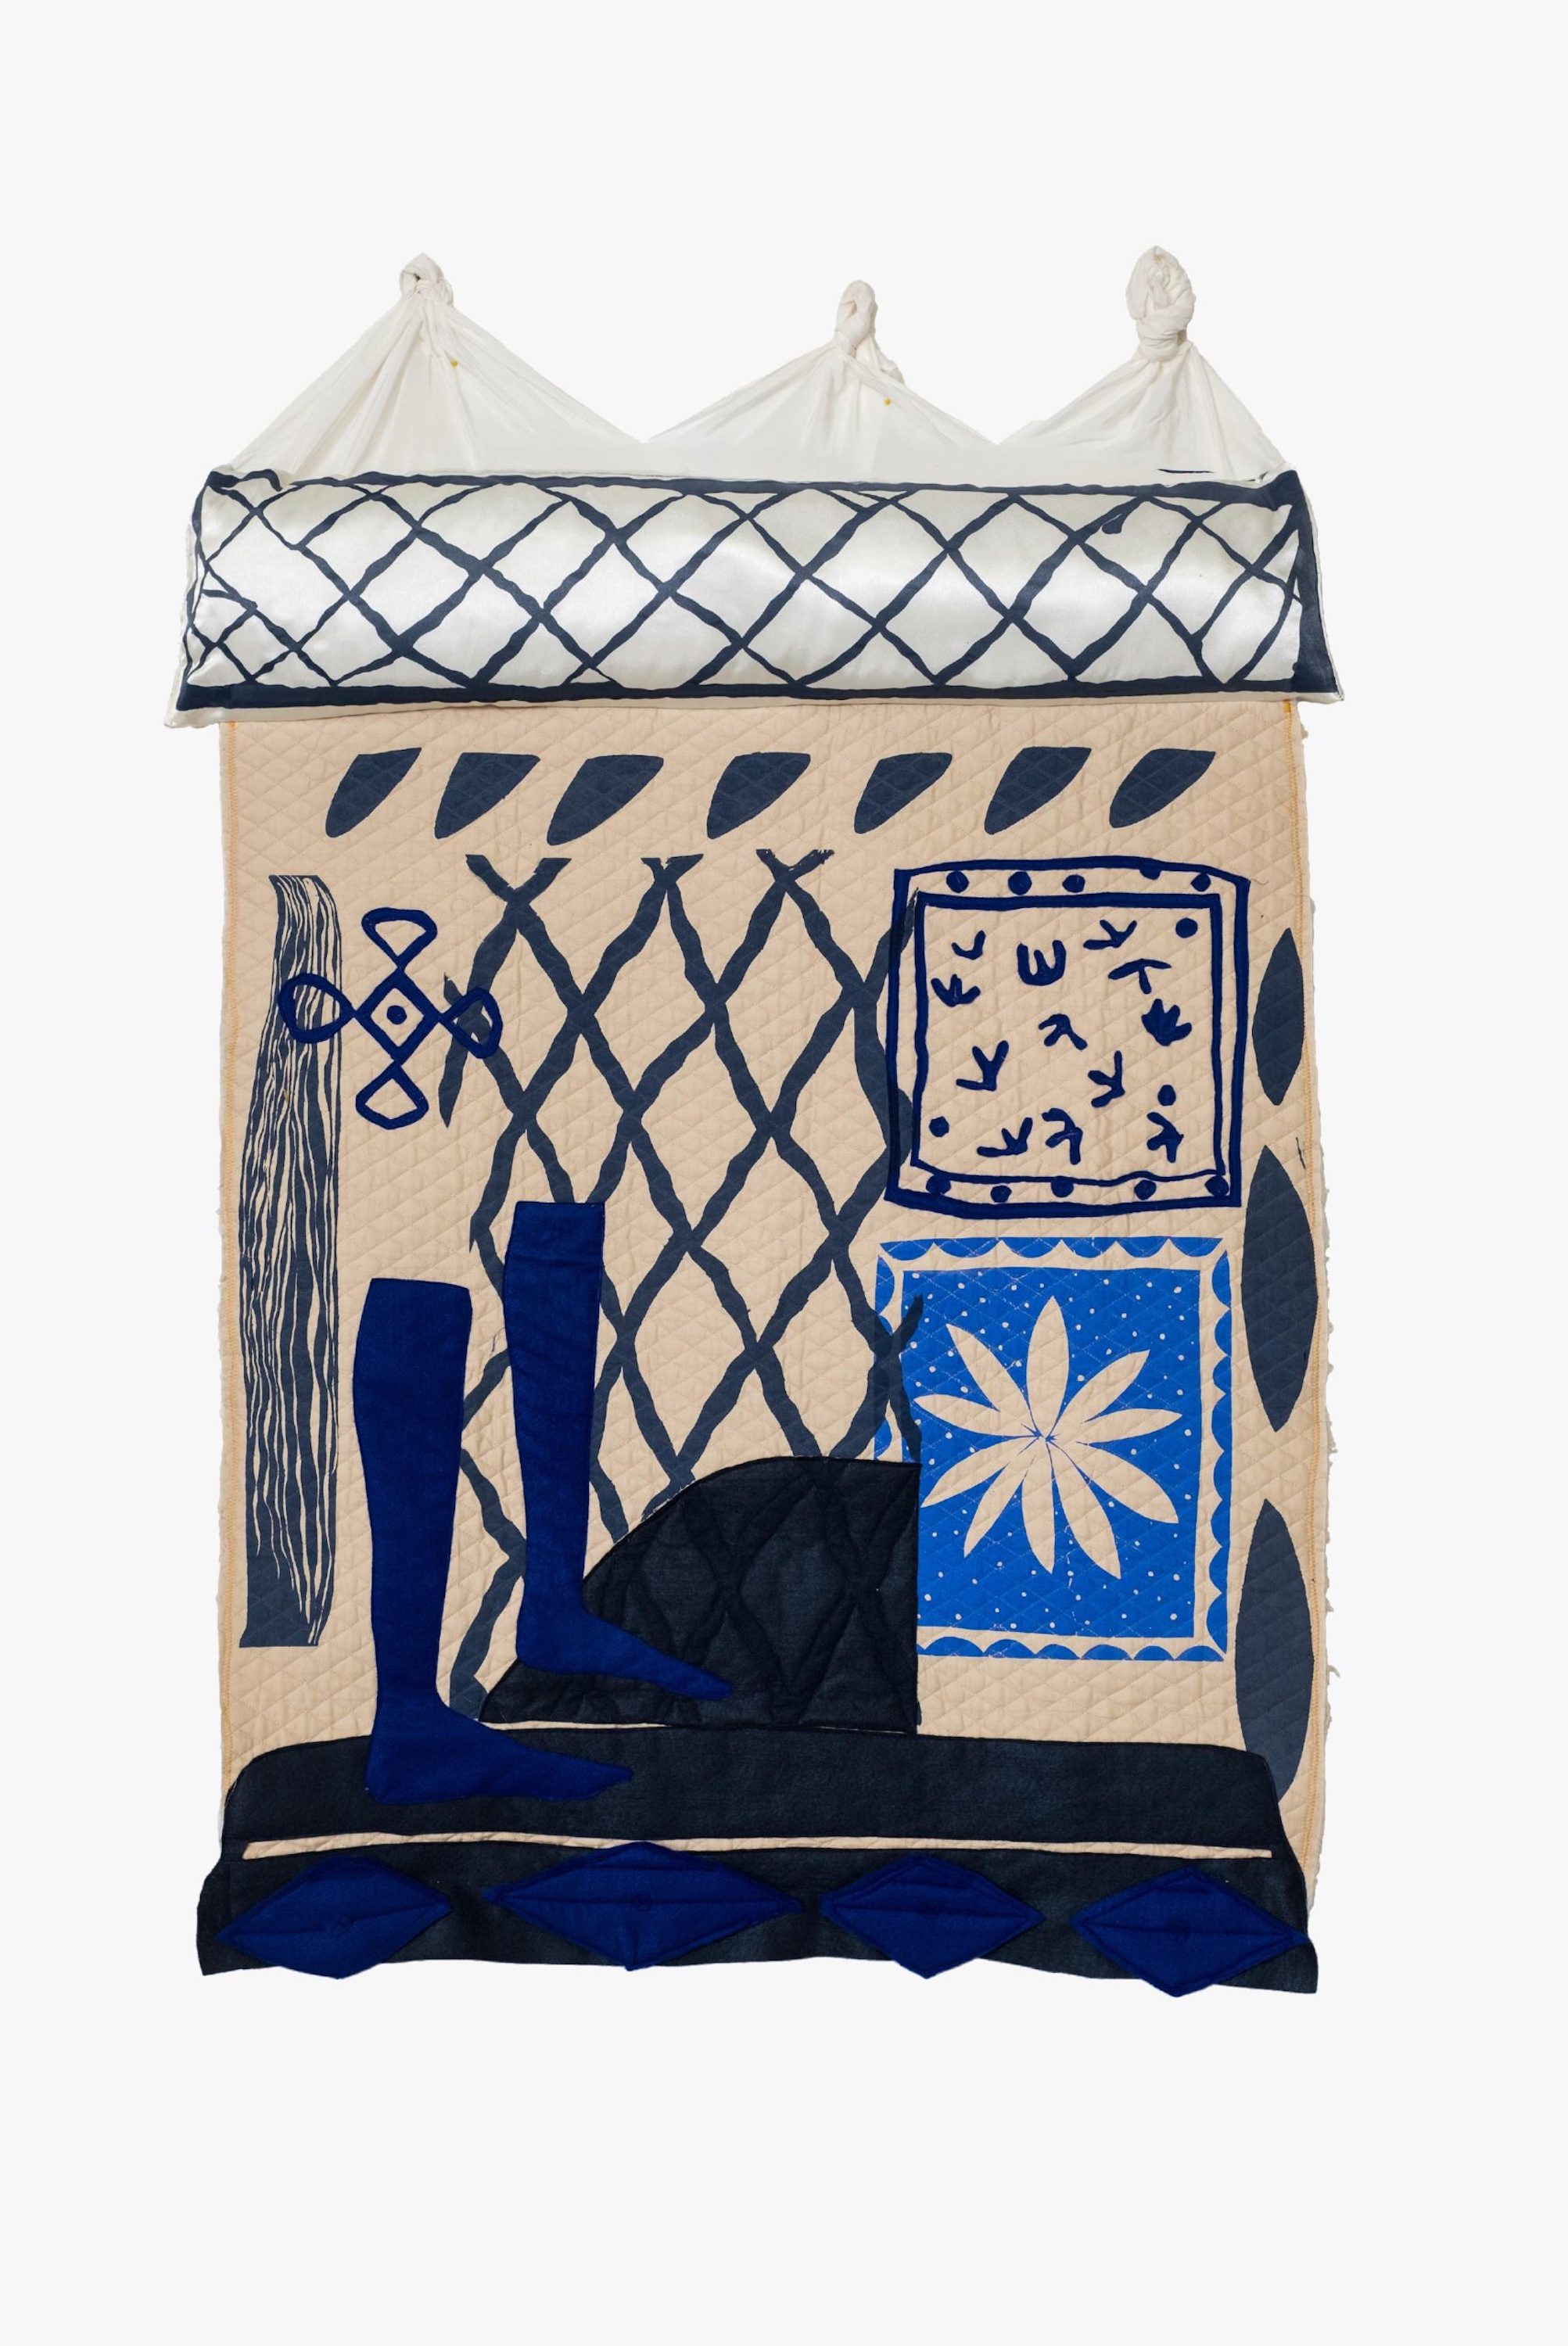 A fiber work with a cream background and blue and black elements depicting disembodied feet standing on a threshold outside of a dwelling with a hatched door.